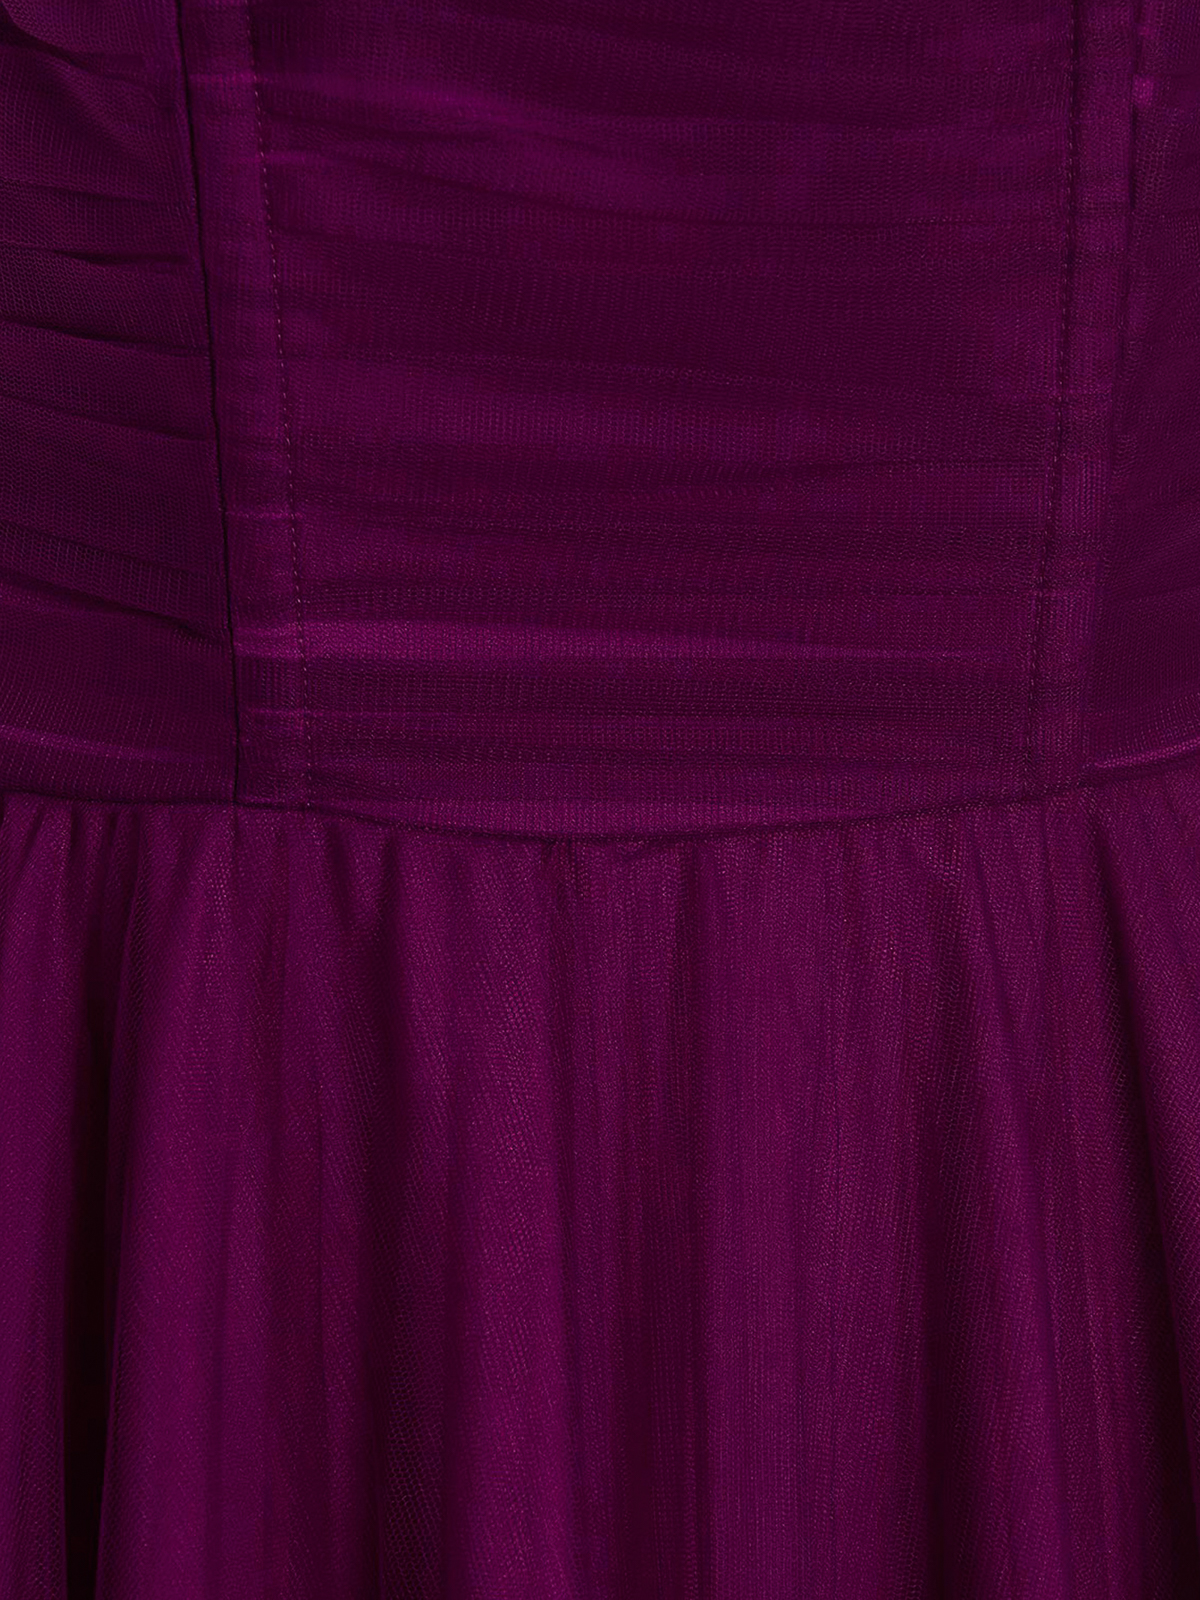 Shop 19:13 Dresscode Long Tulle Dress With Pleated Skirt In Purple